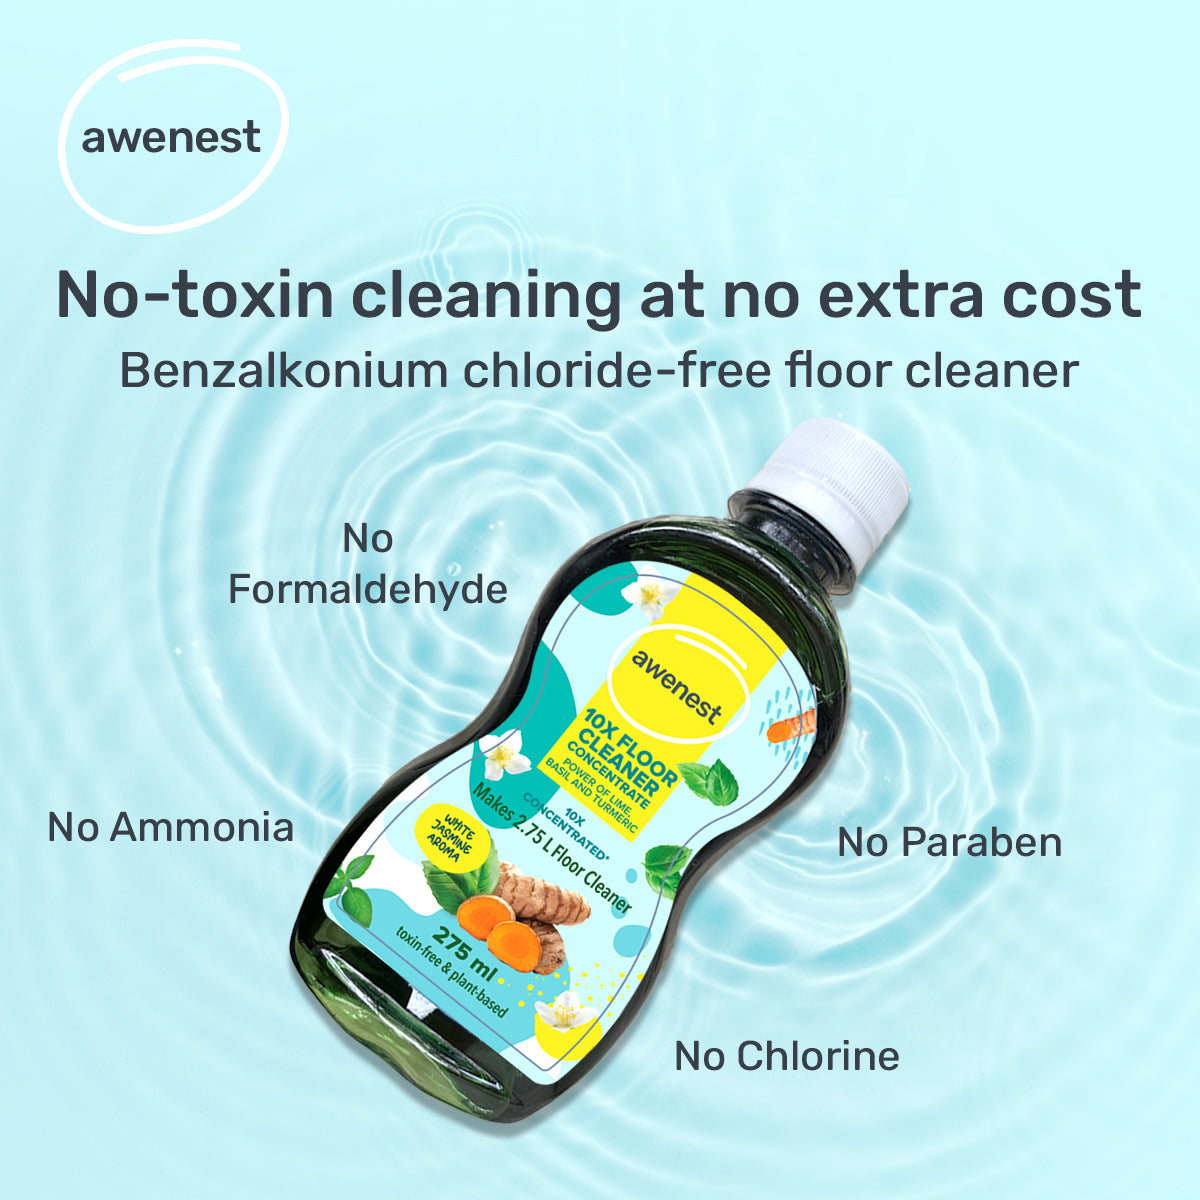 10x concentrated floor cleaner with no chlorine, ammonia, paraben, formaldehyde